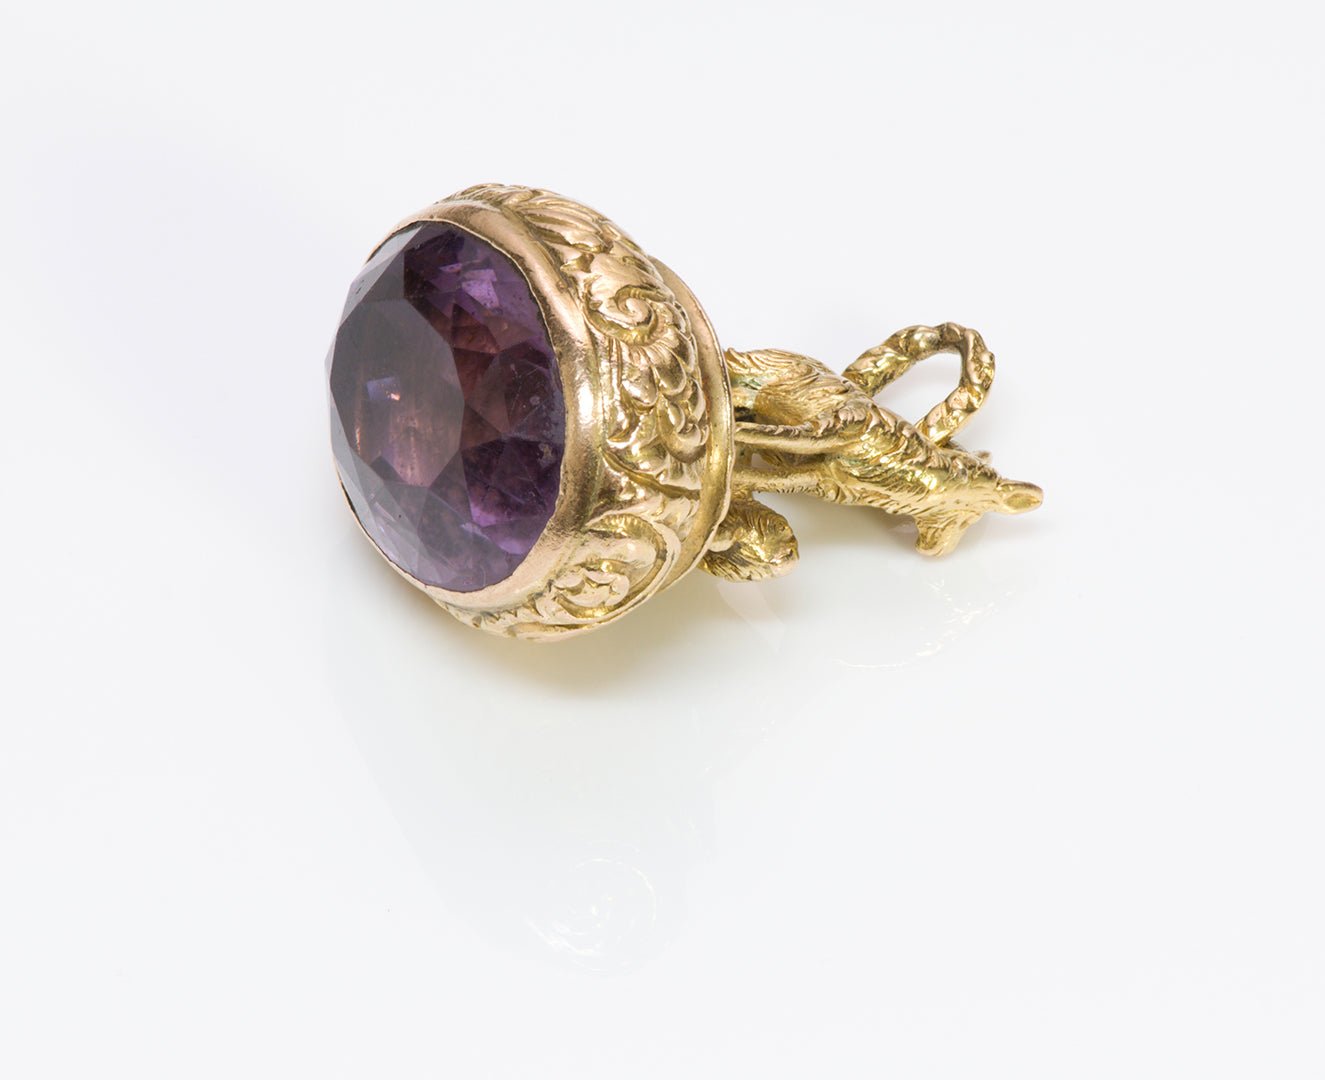 Antique Gold Amethyst Figural Fob Seal - DSF Antique Jewelry